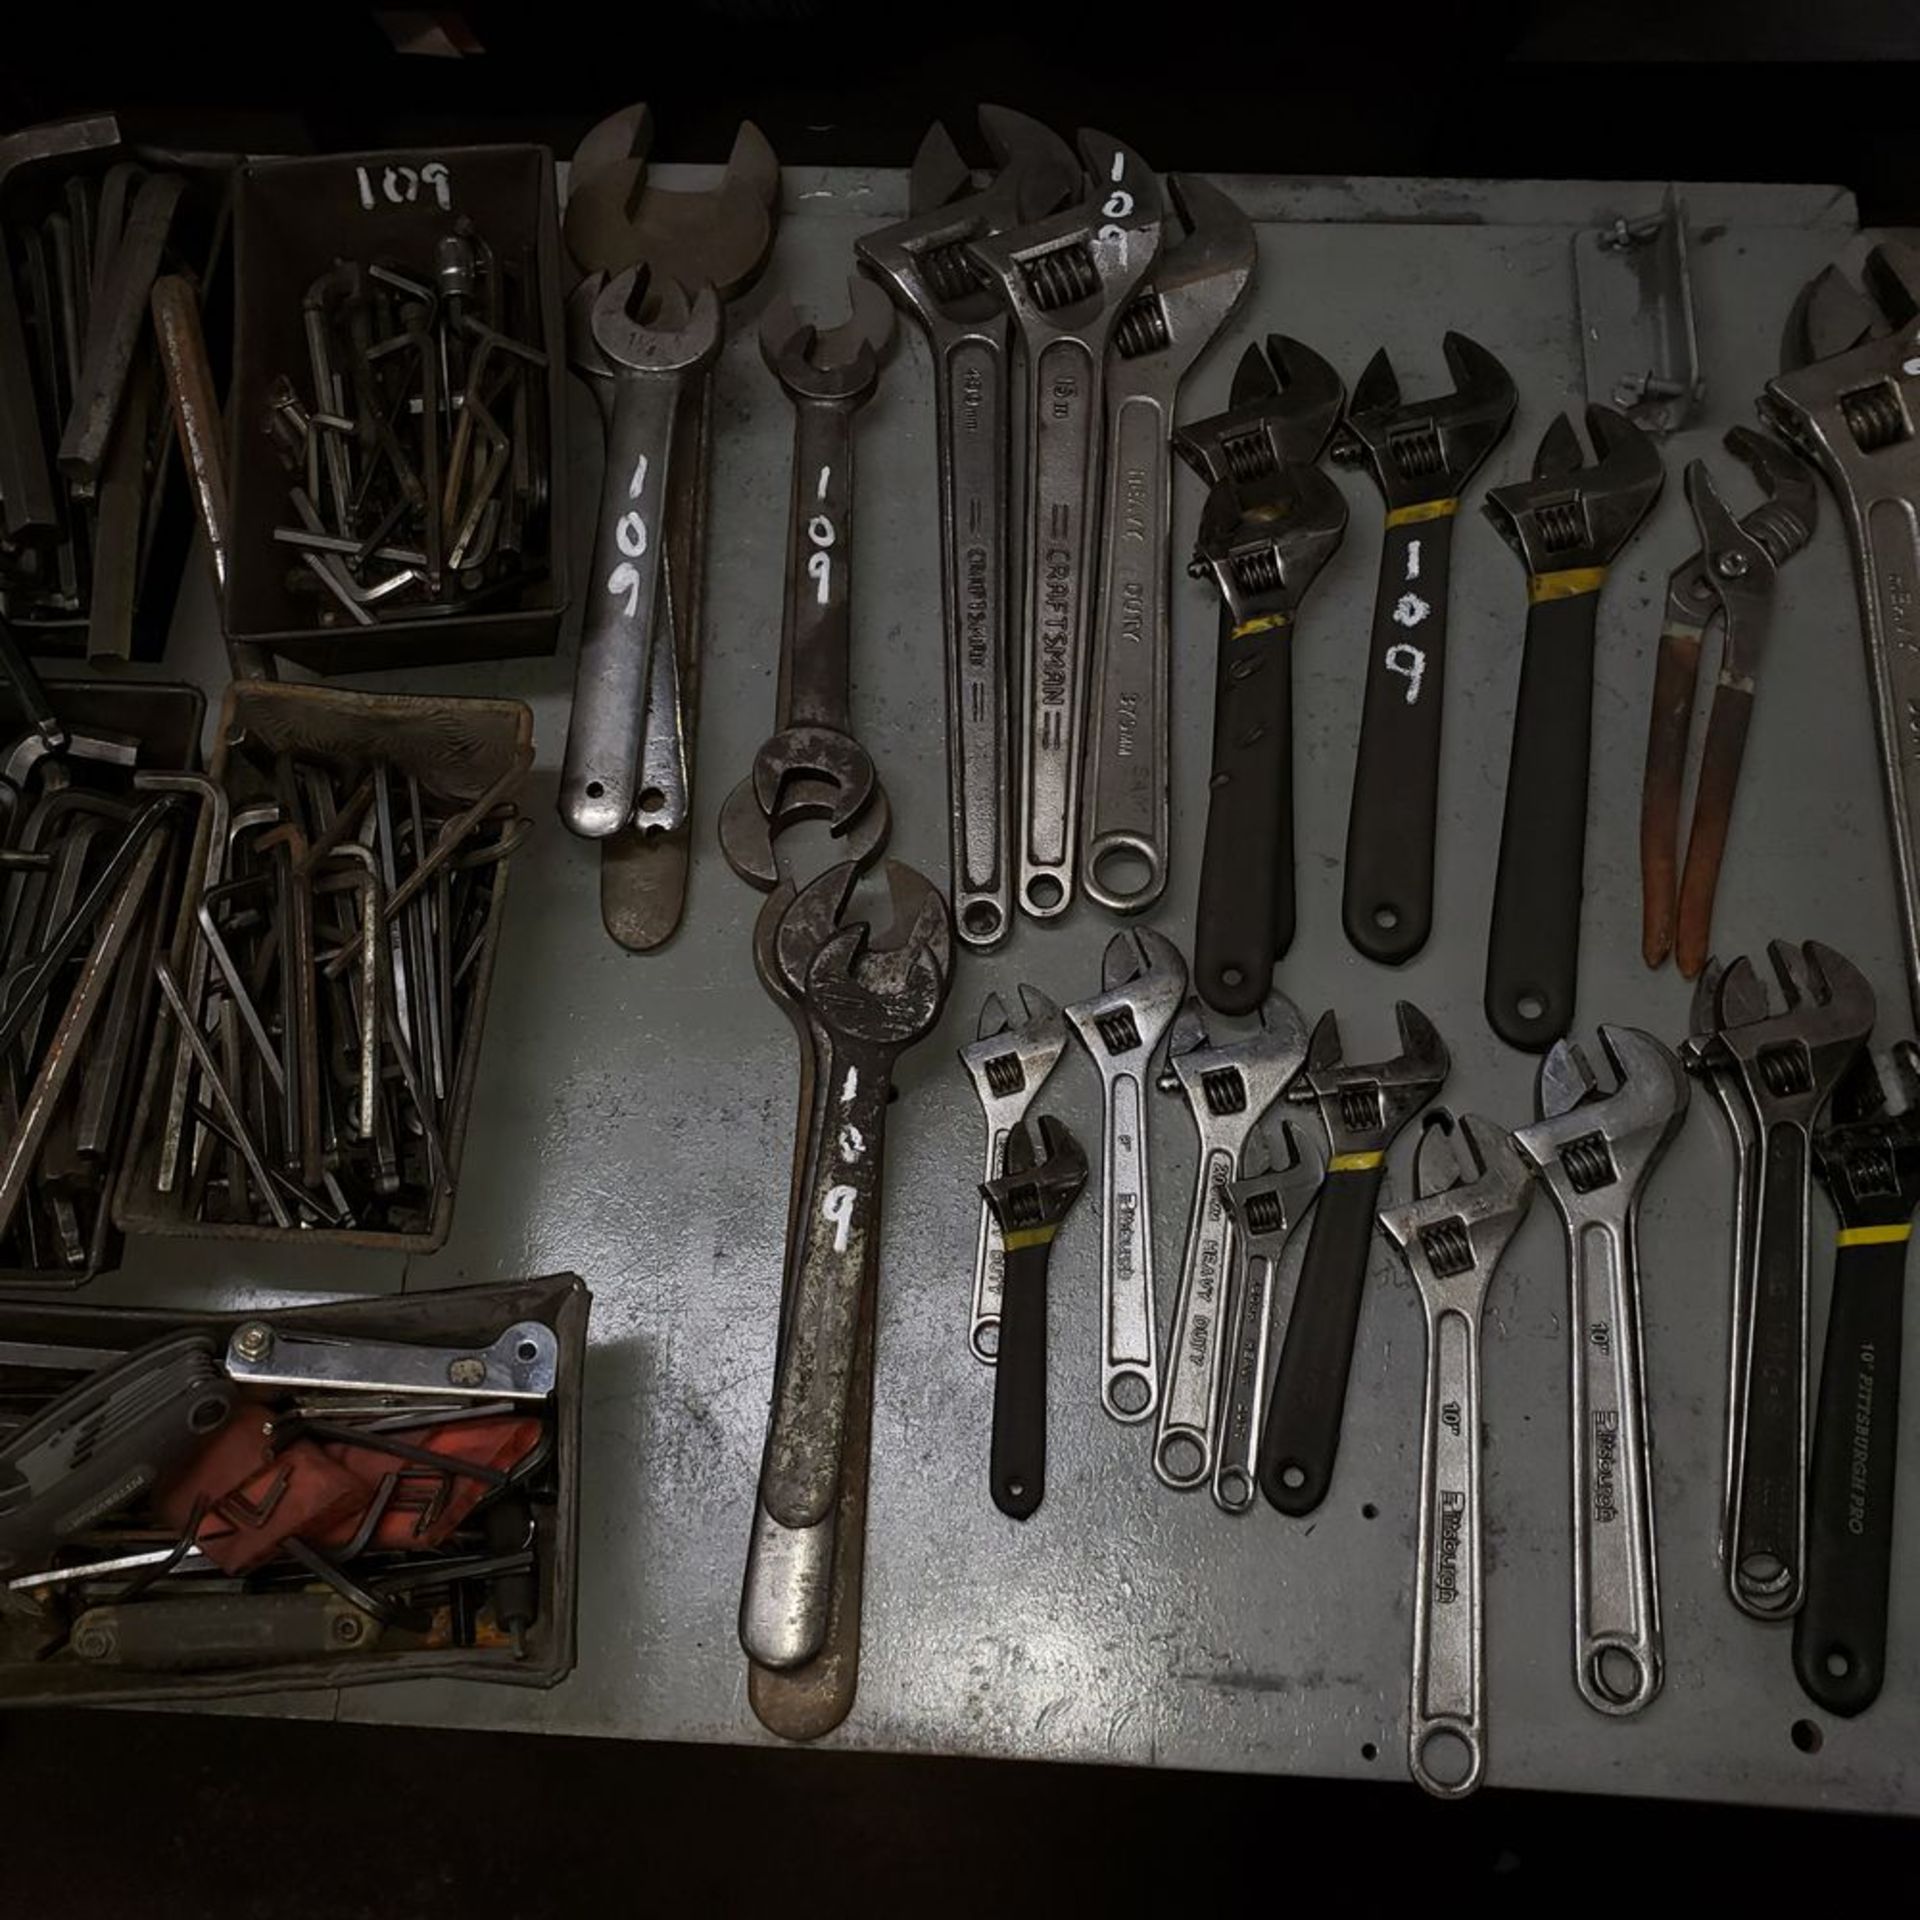 Group of Large Craftsman Wrenches - Image 3 of 3